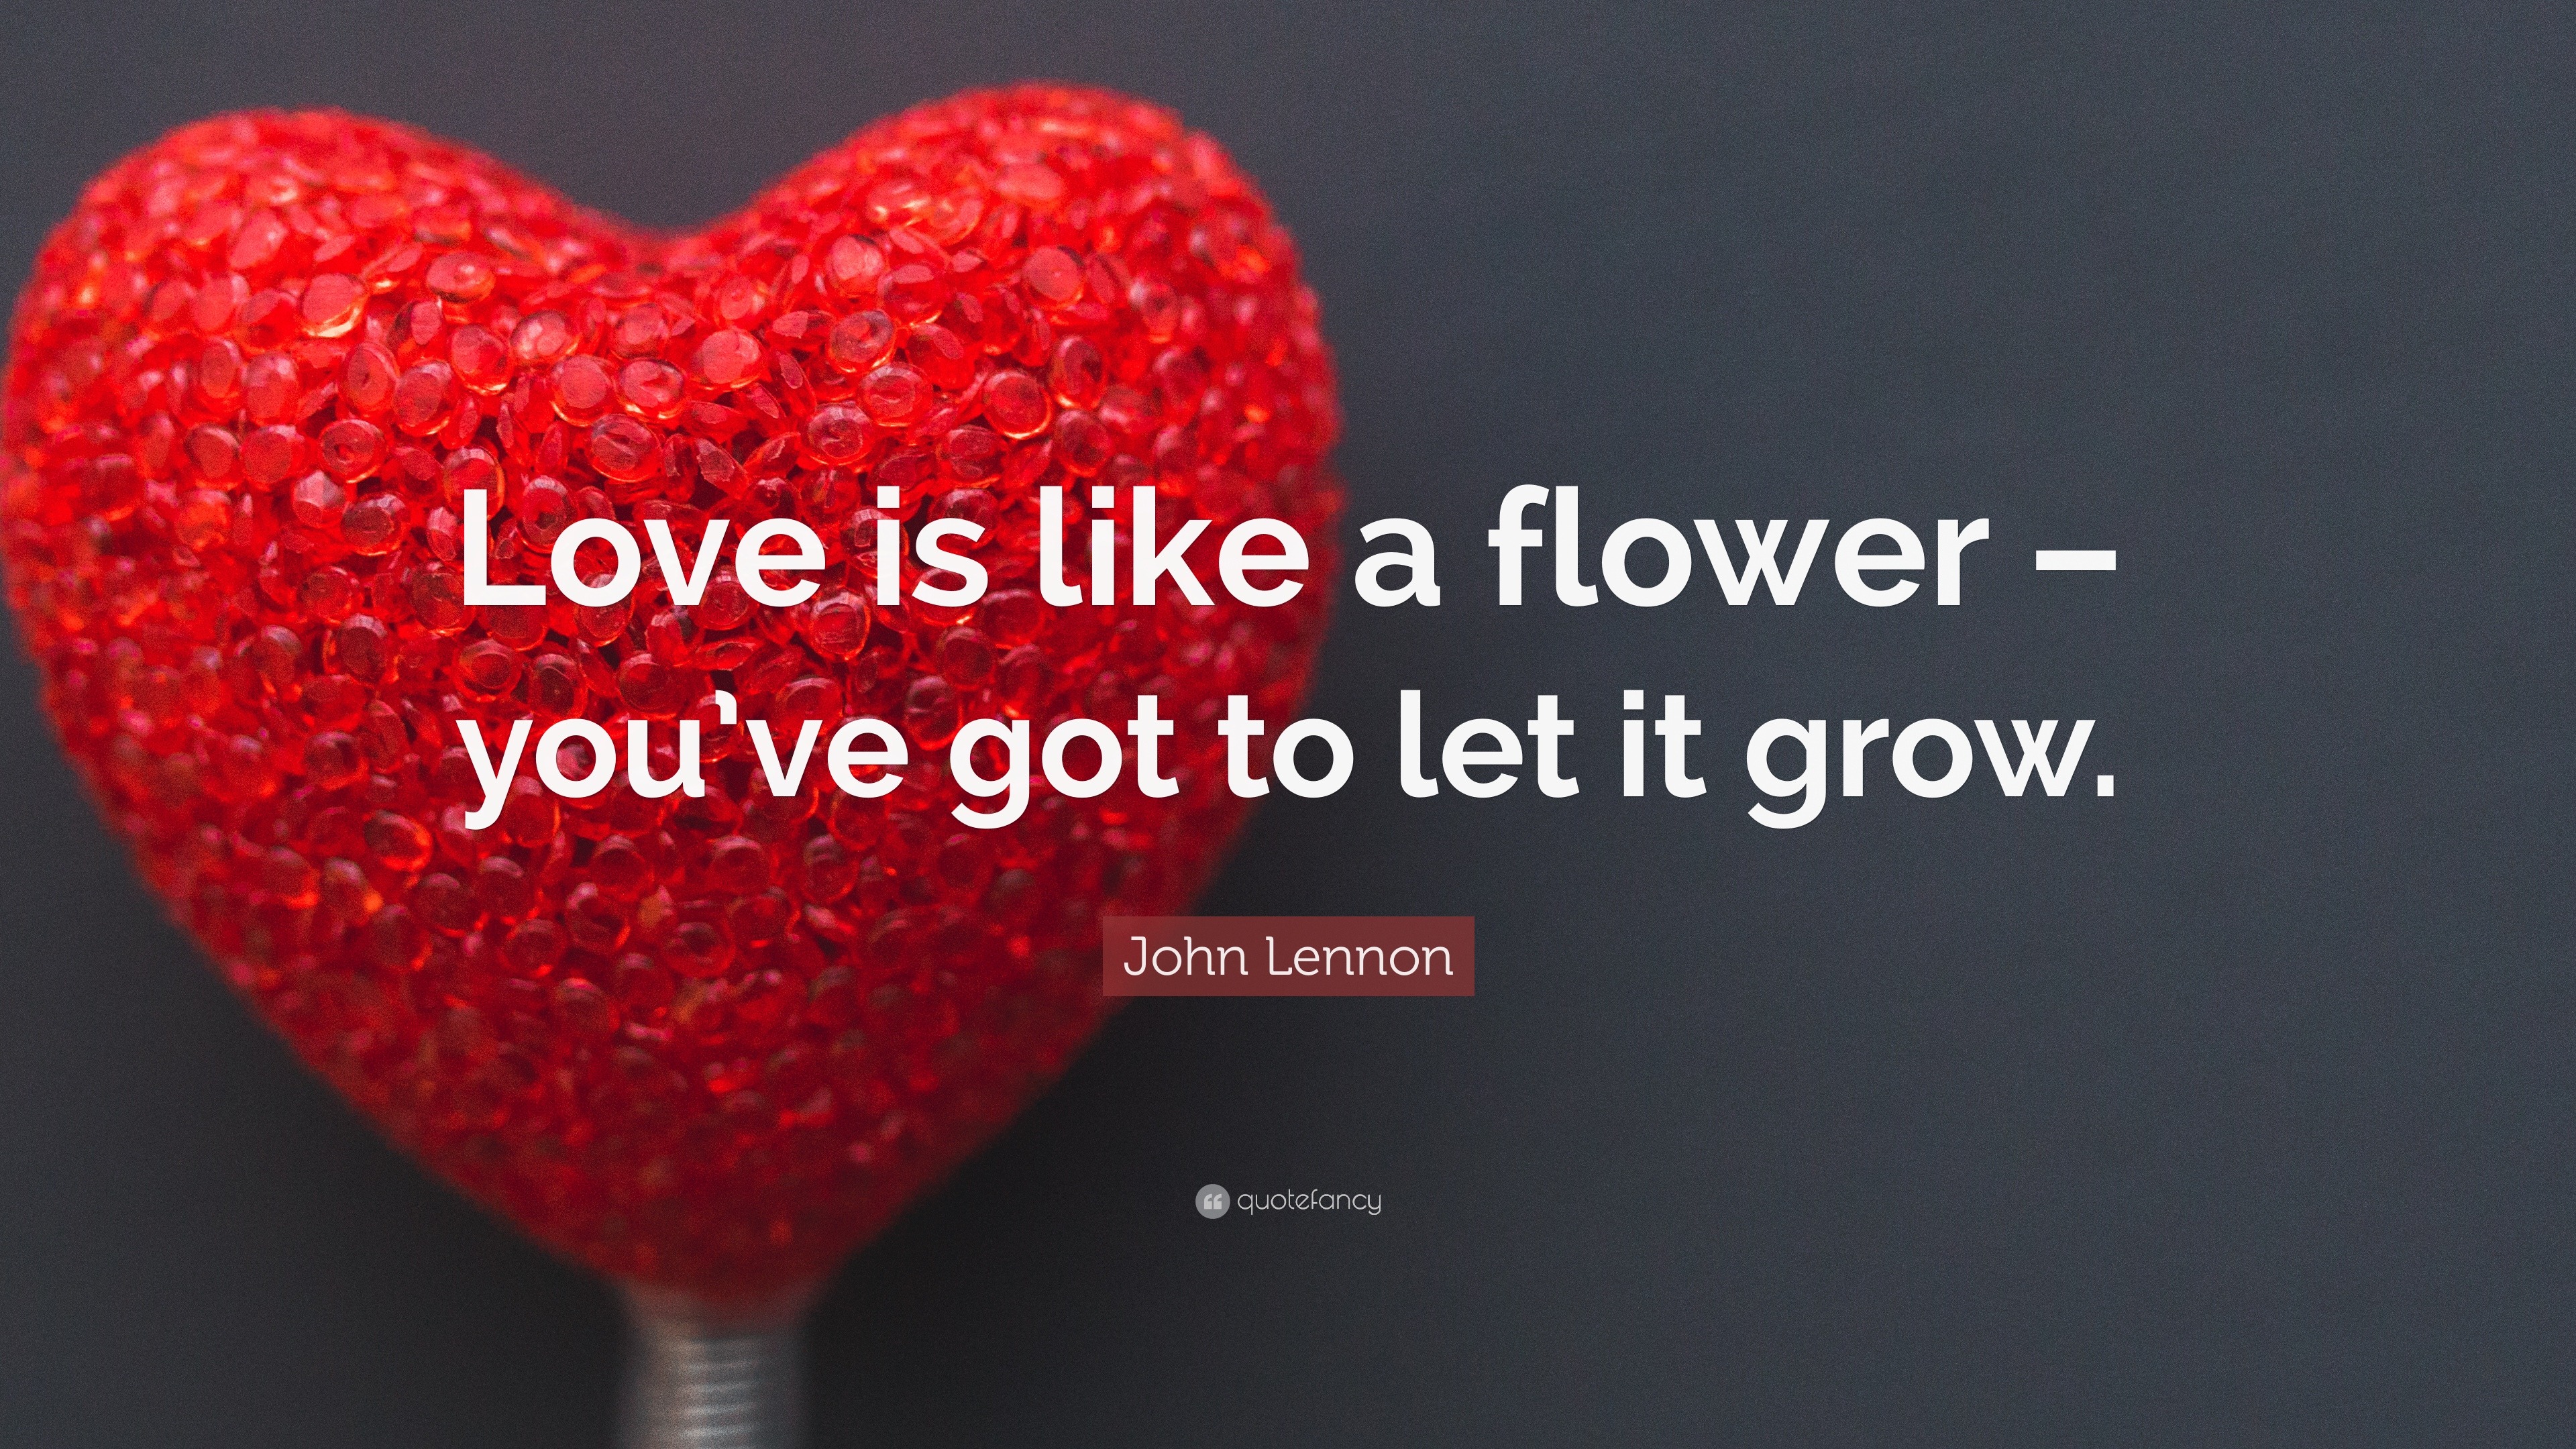 John Lennon Quote “Love is like a flower – you ve got to